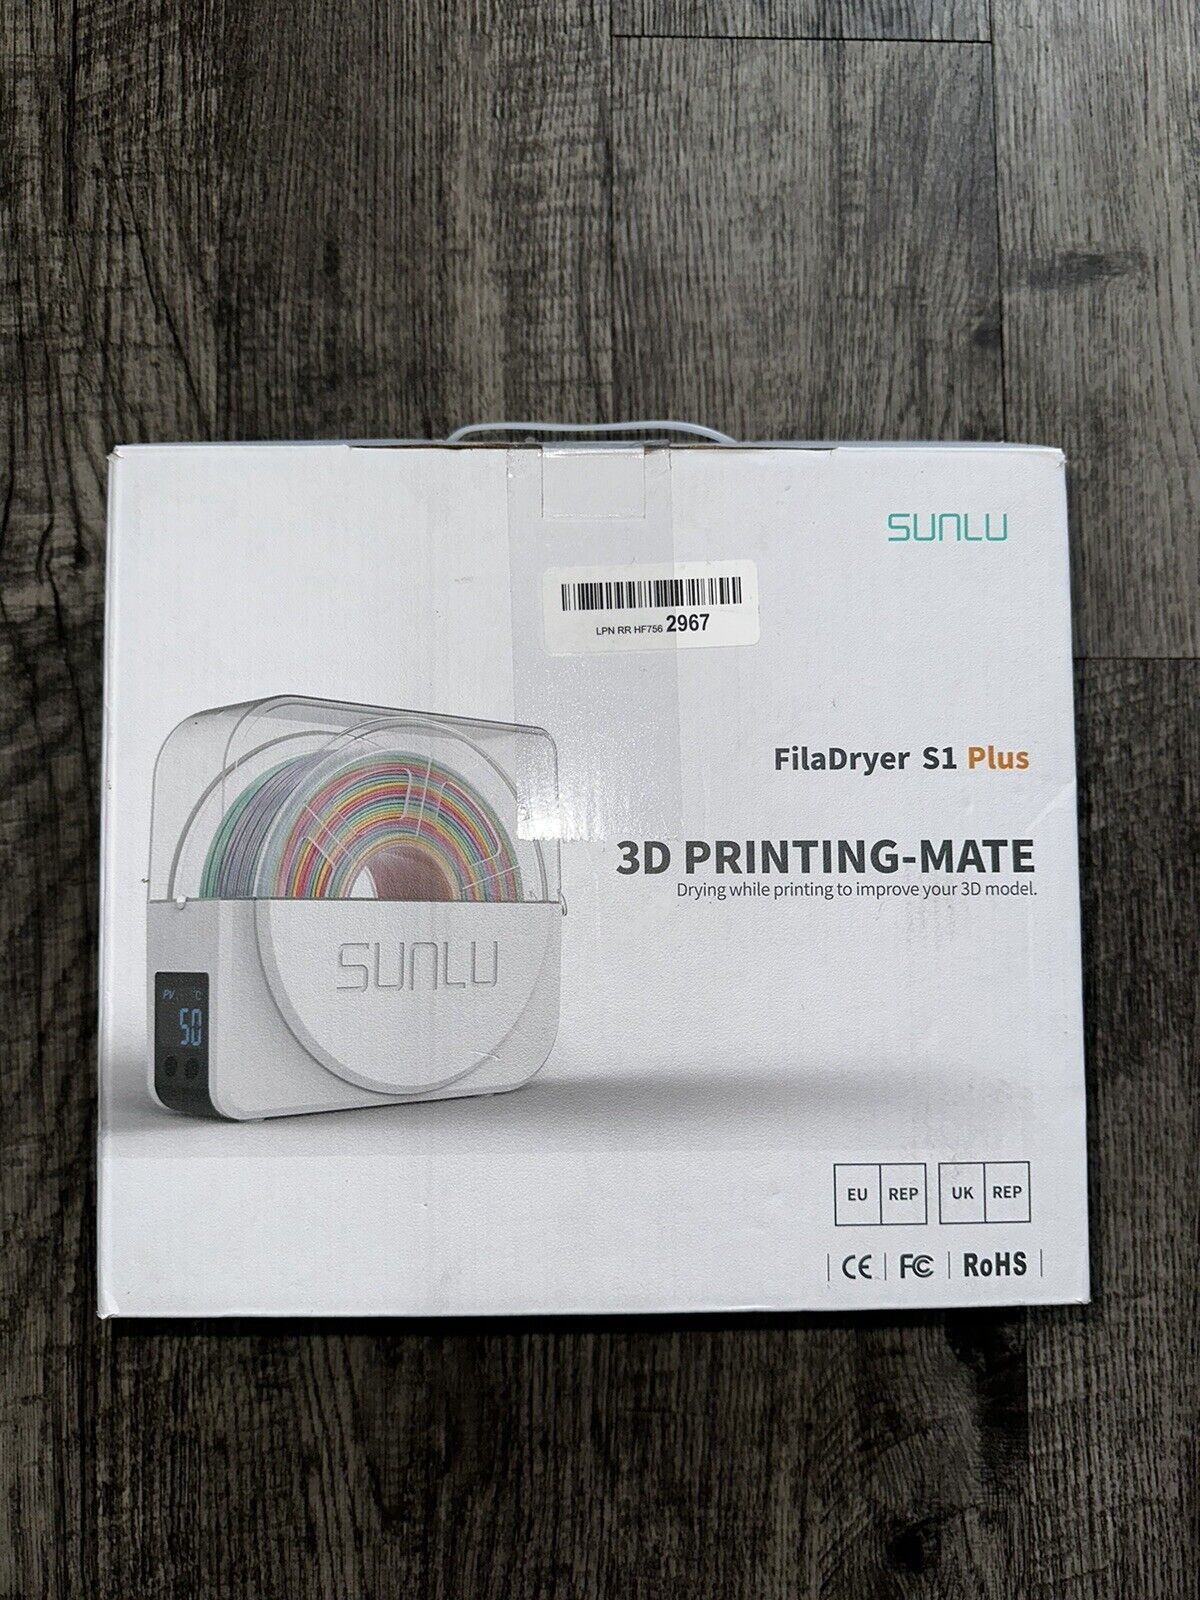 SUNLU FilaDryer S1 3D Printing-Mate Drying While Printing To Improve 3D Model